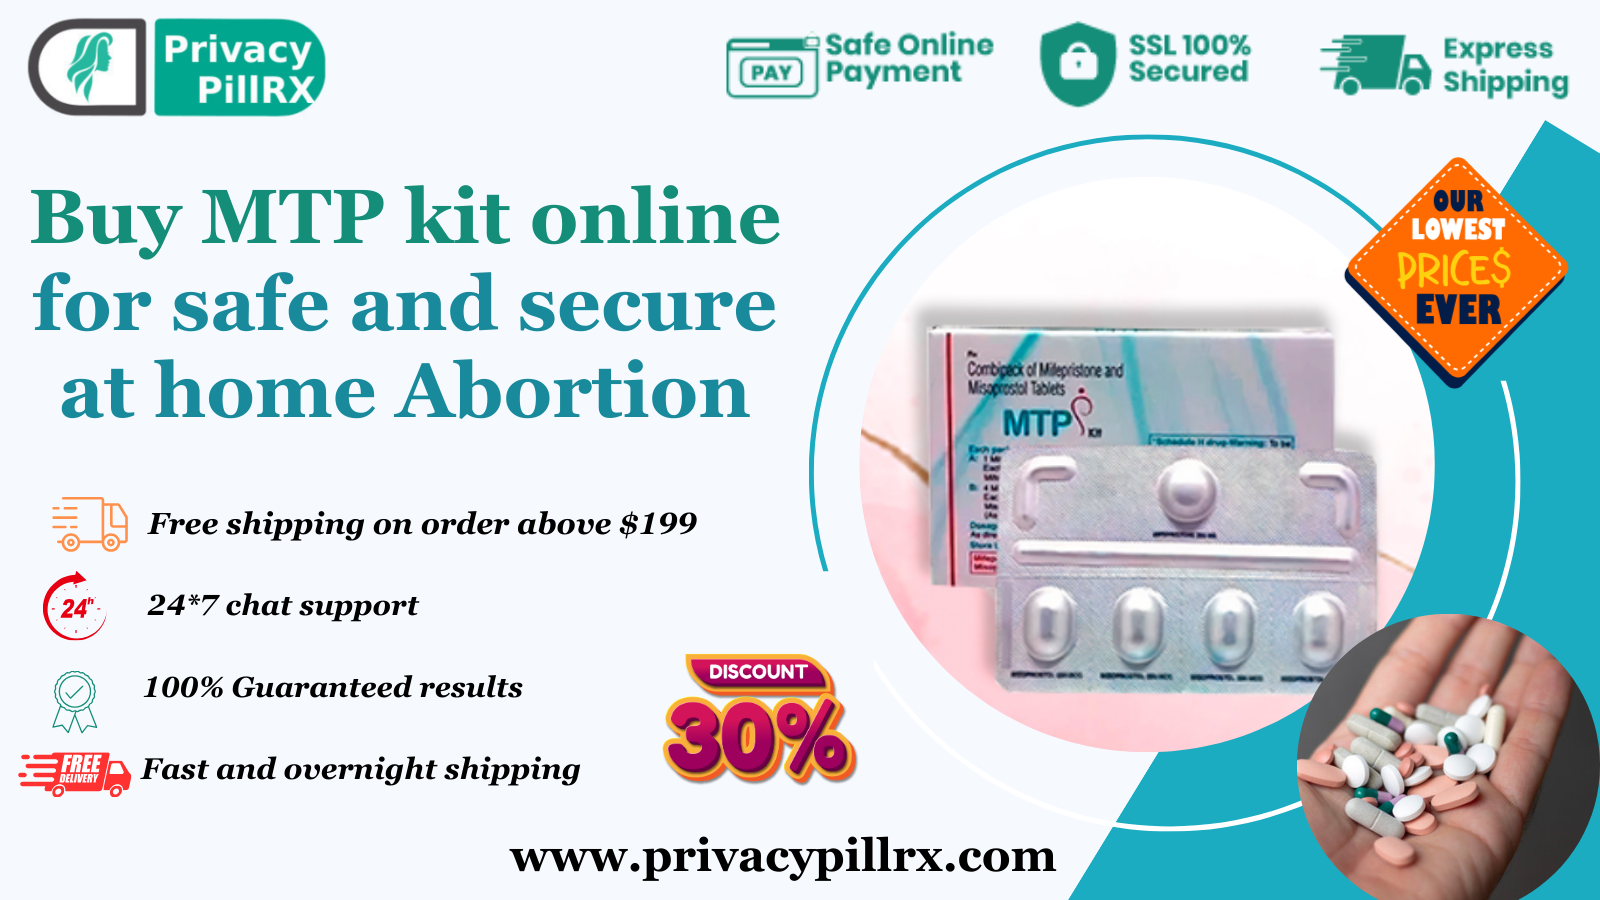 Buy MTP kit online for safe and secure at home abortion30  - Idaho - Boise ID1547748